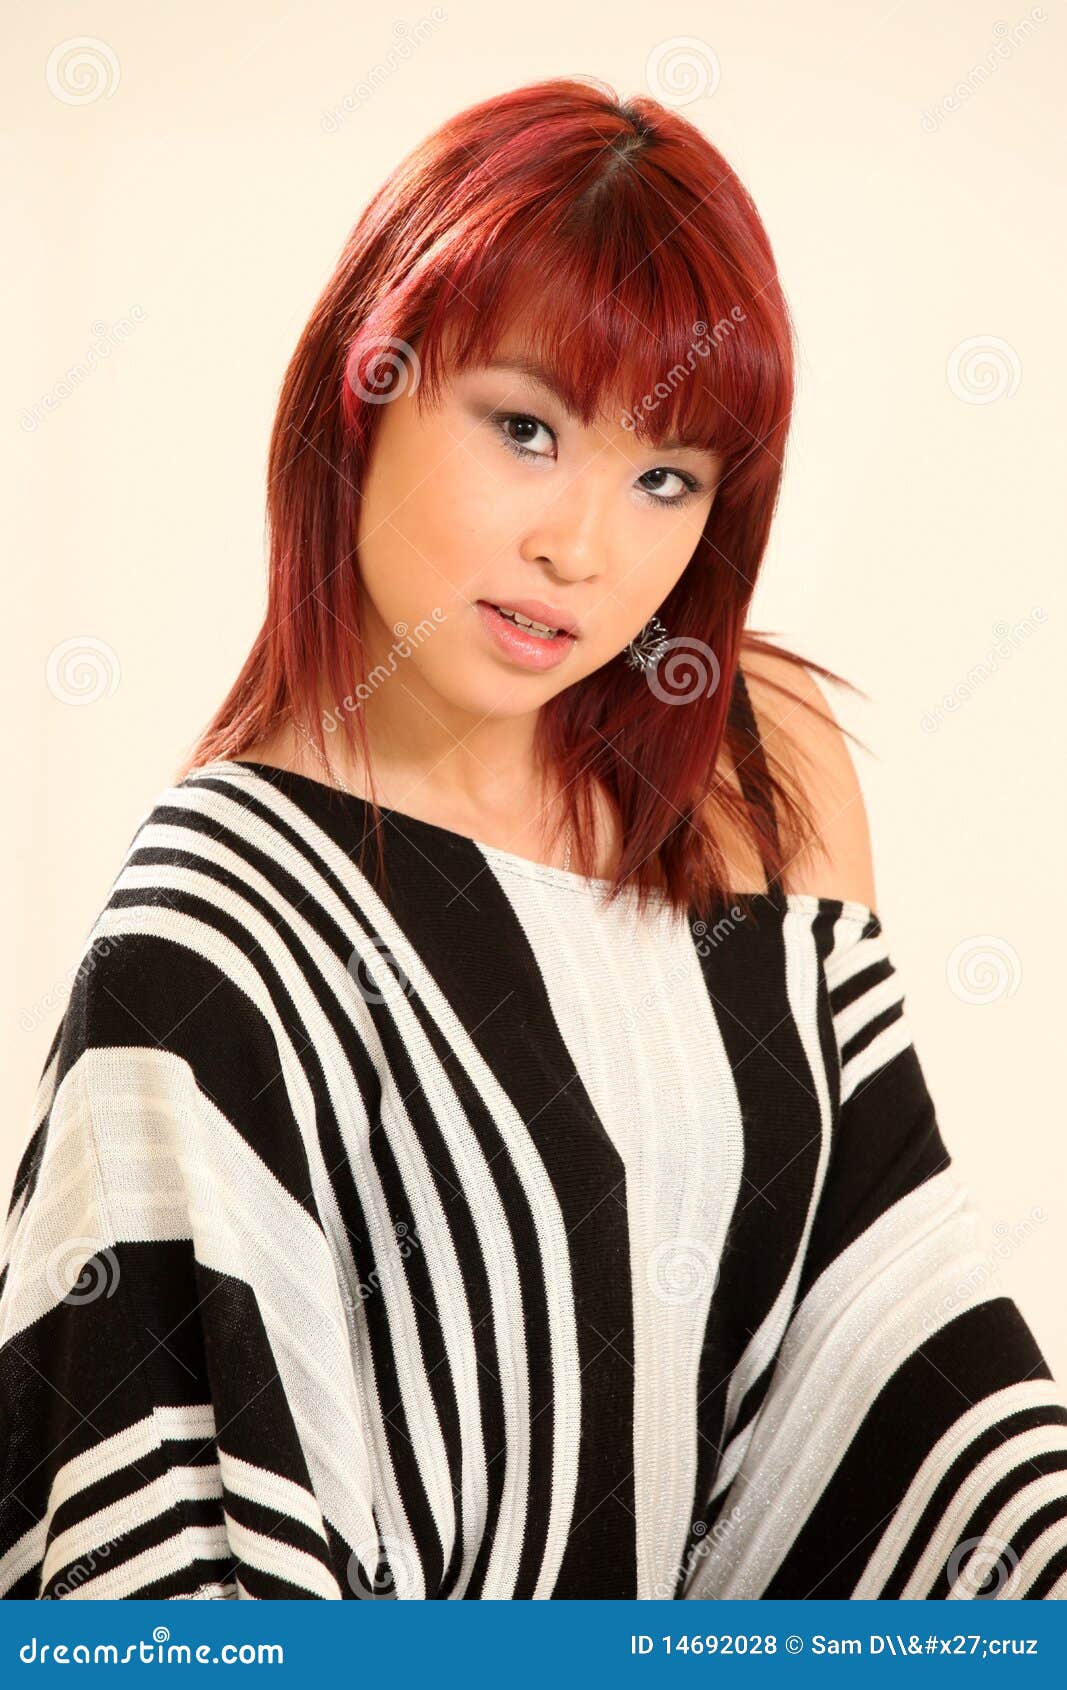 Cute Asian Girl 80s Style stock photo. Image of girl 